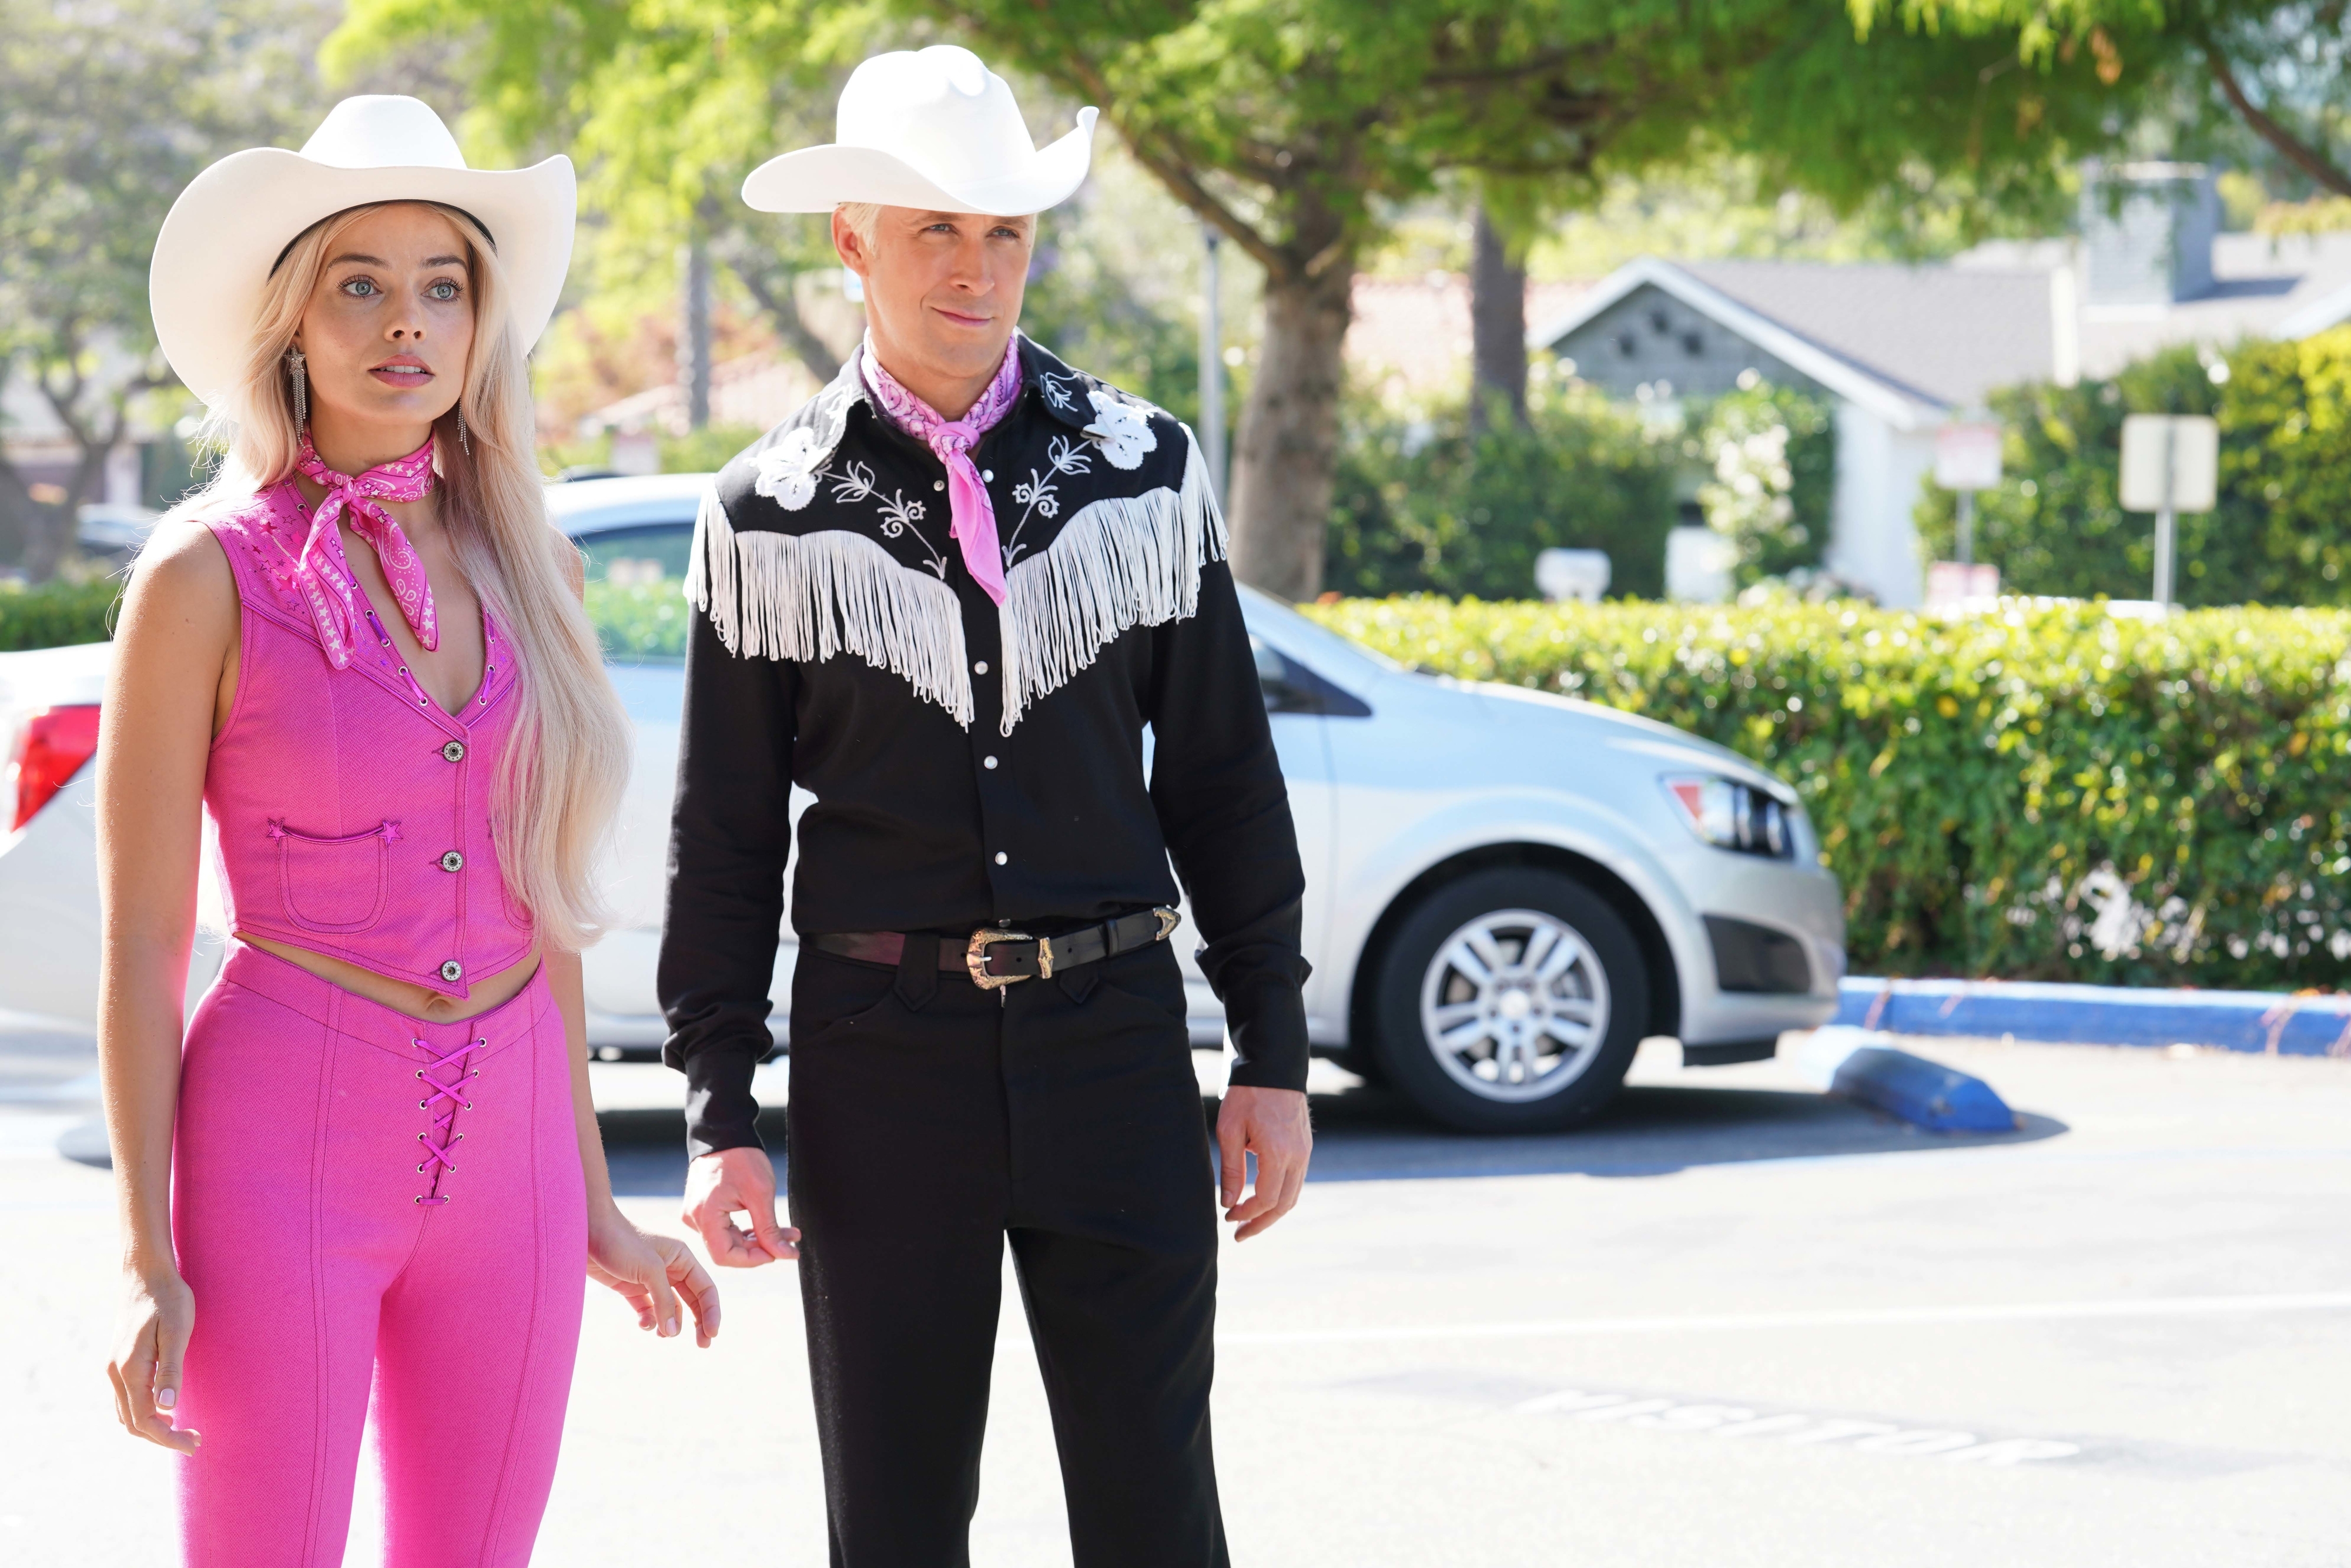 Margot as Barbie and Ryan as Ken standing outside wearing Western-style outfits including cowboy hats